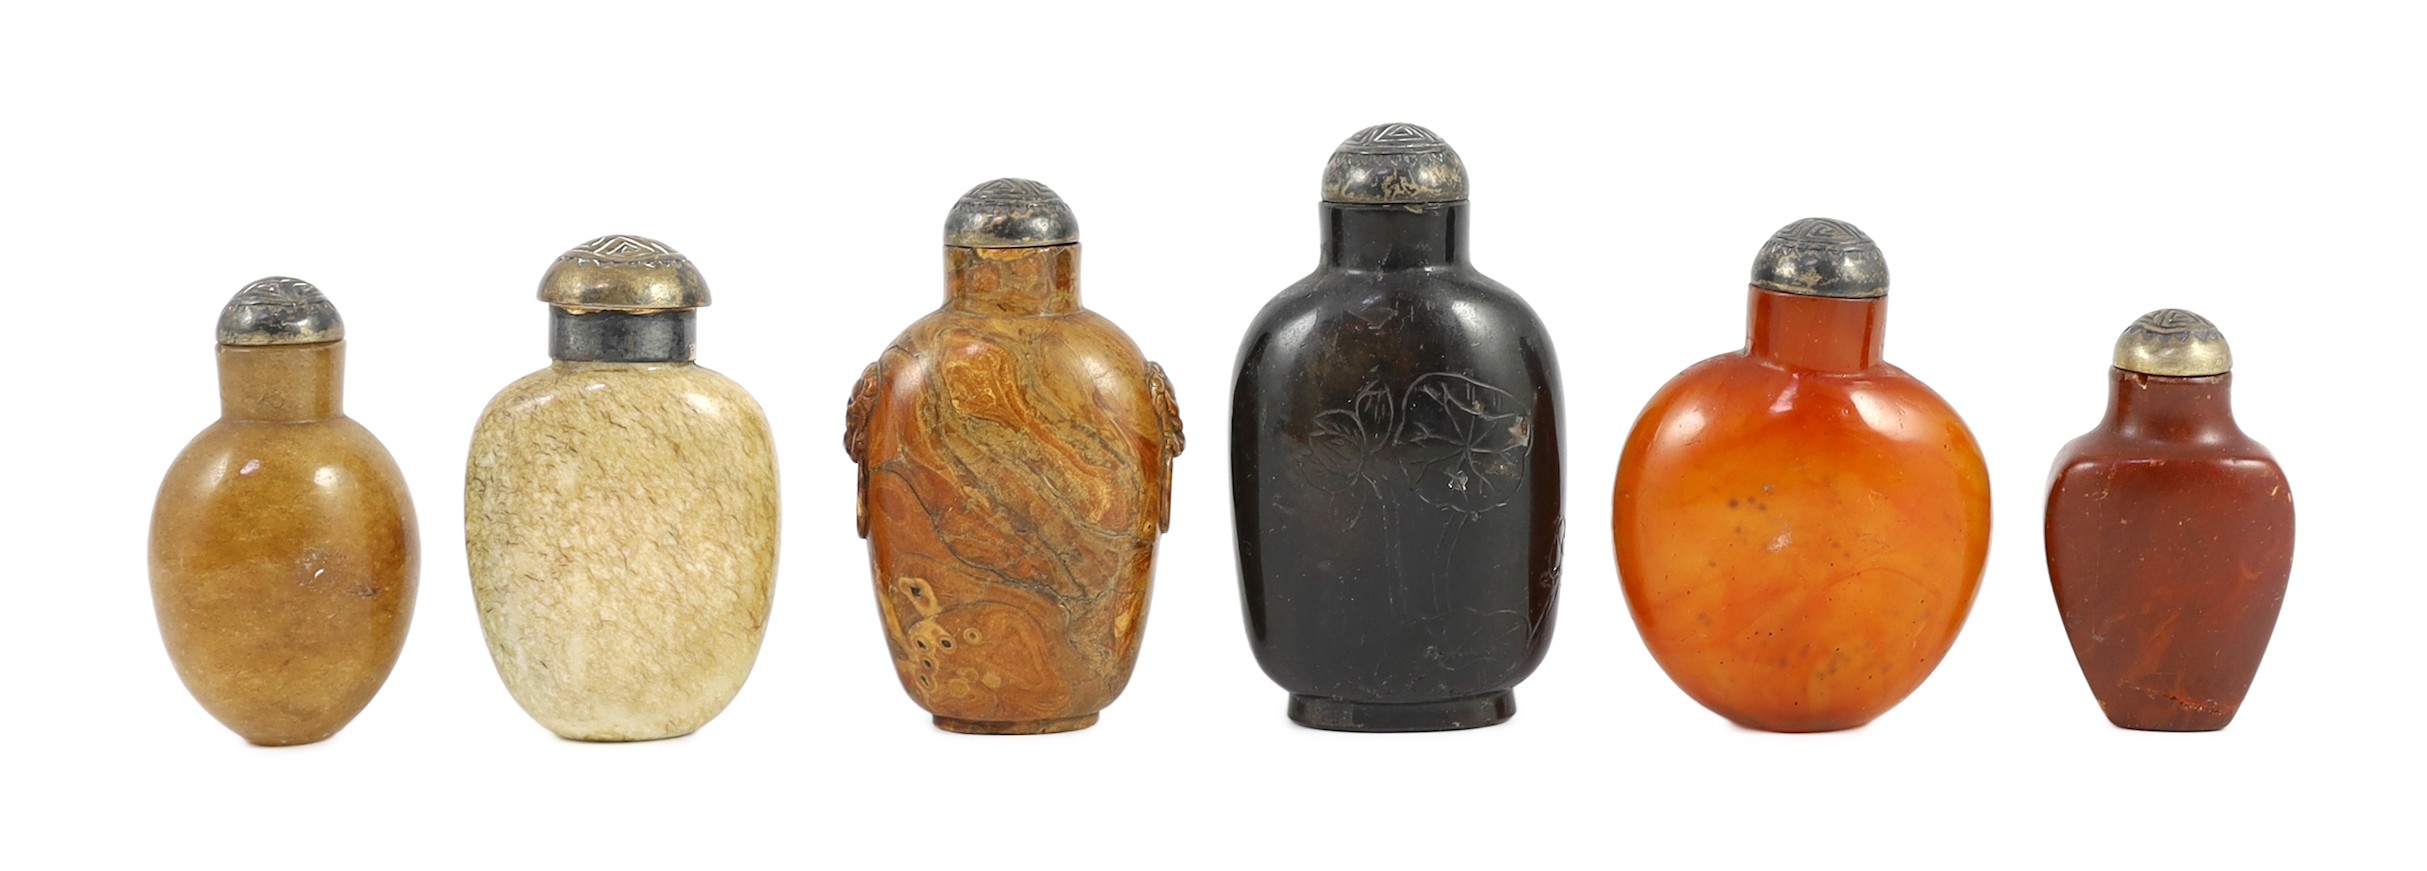 A scholarly collection of six 19th century Chinese snuff bottles, some faults                                                                                                                                               